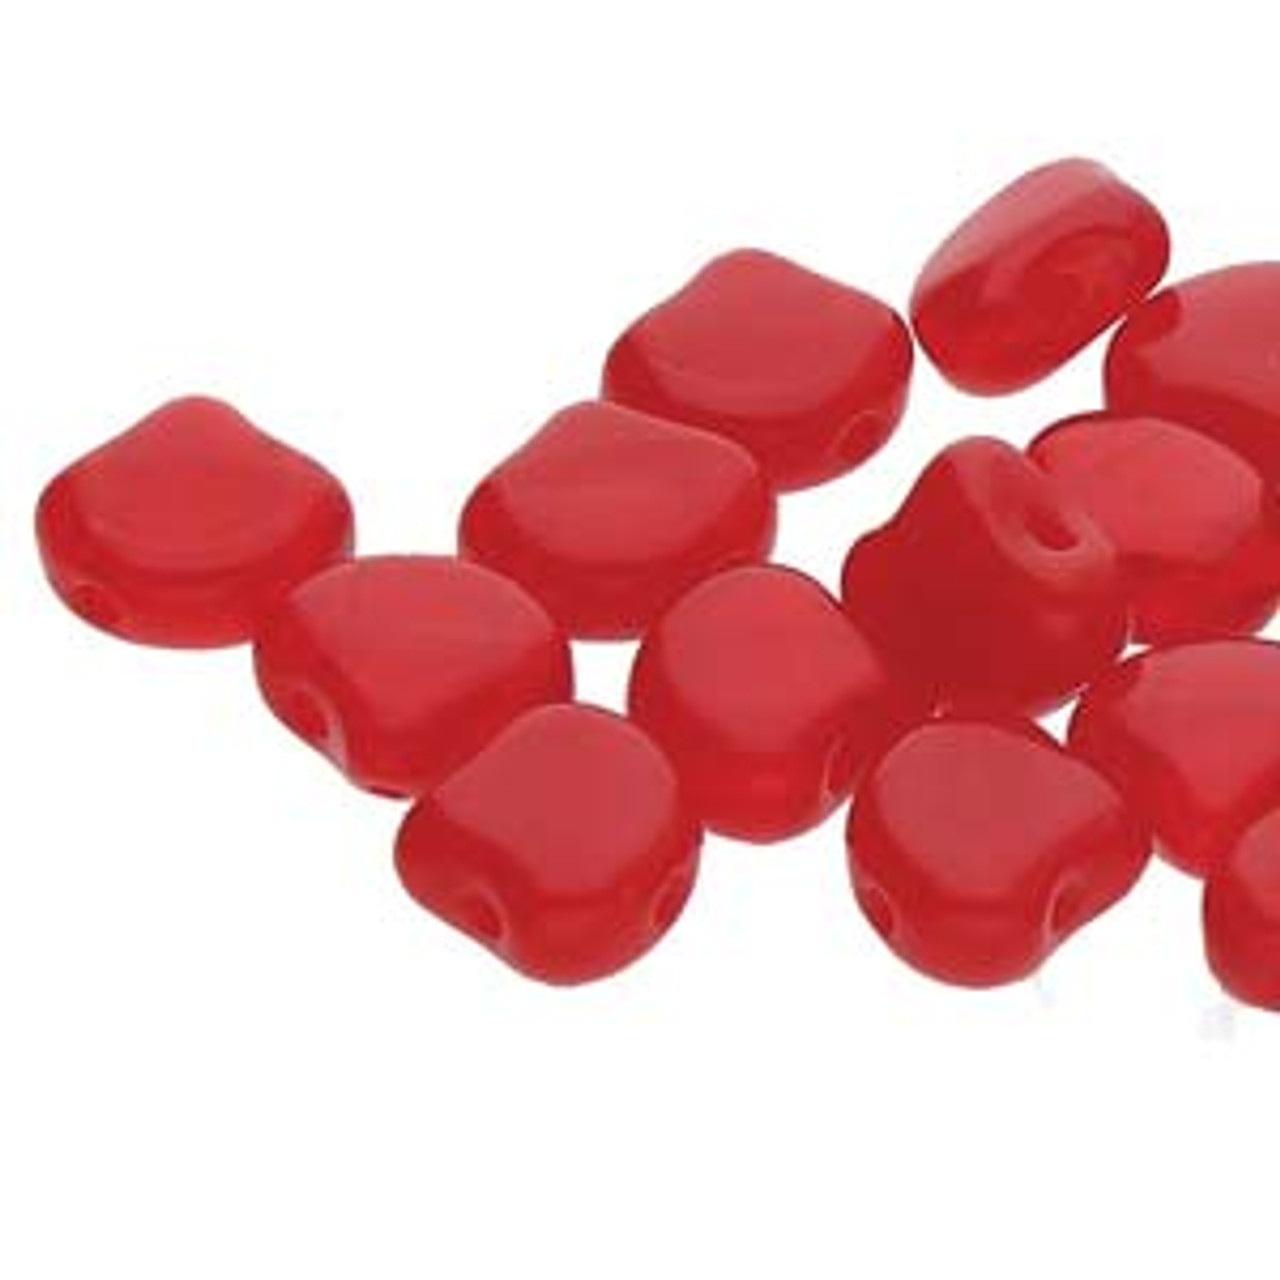 7.5x7.5mm Opal Red Ginko Beads (8 Grams)